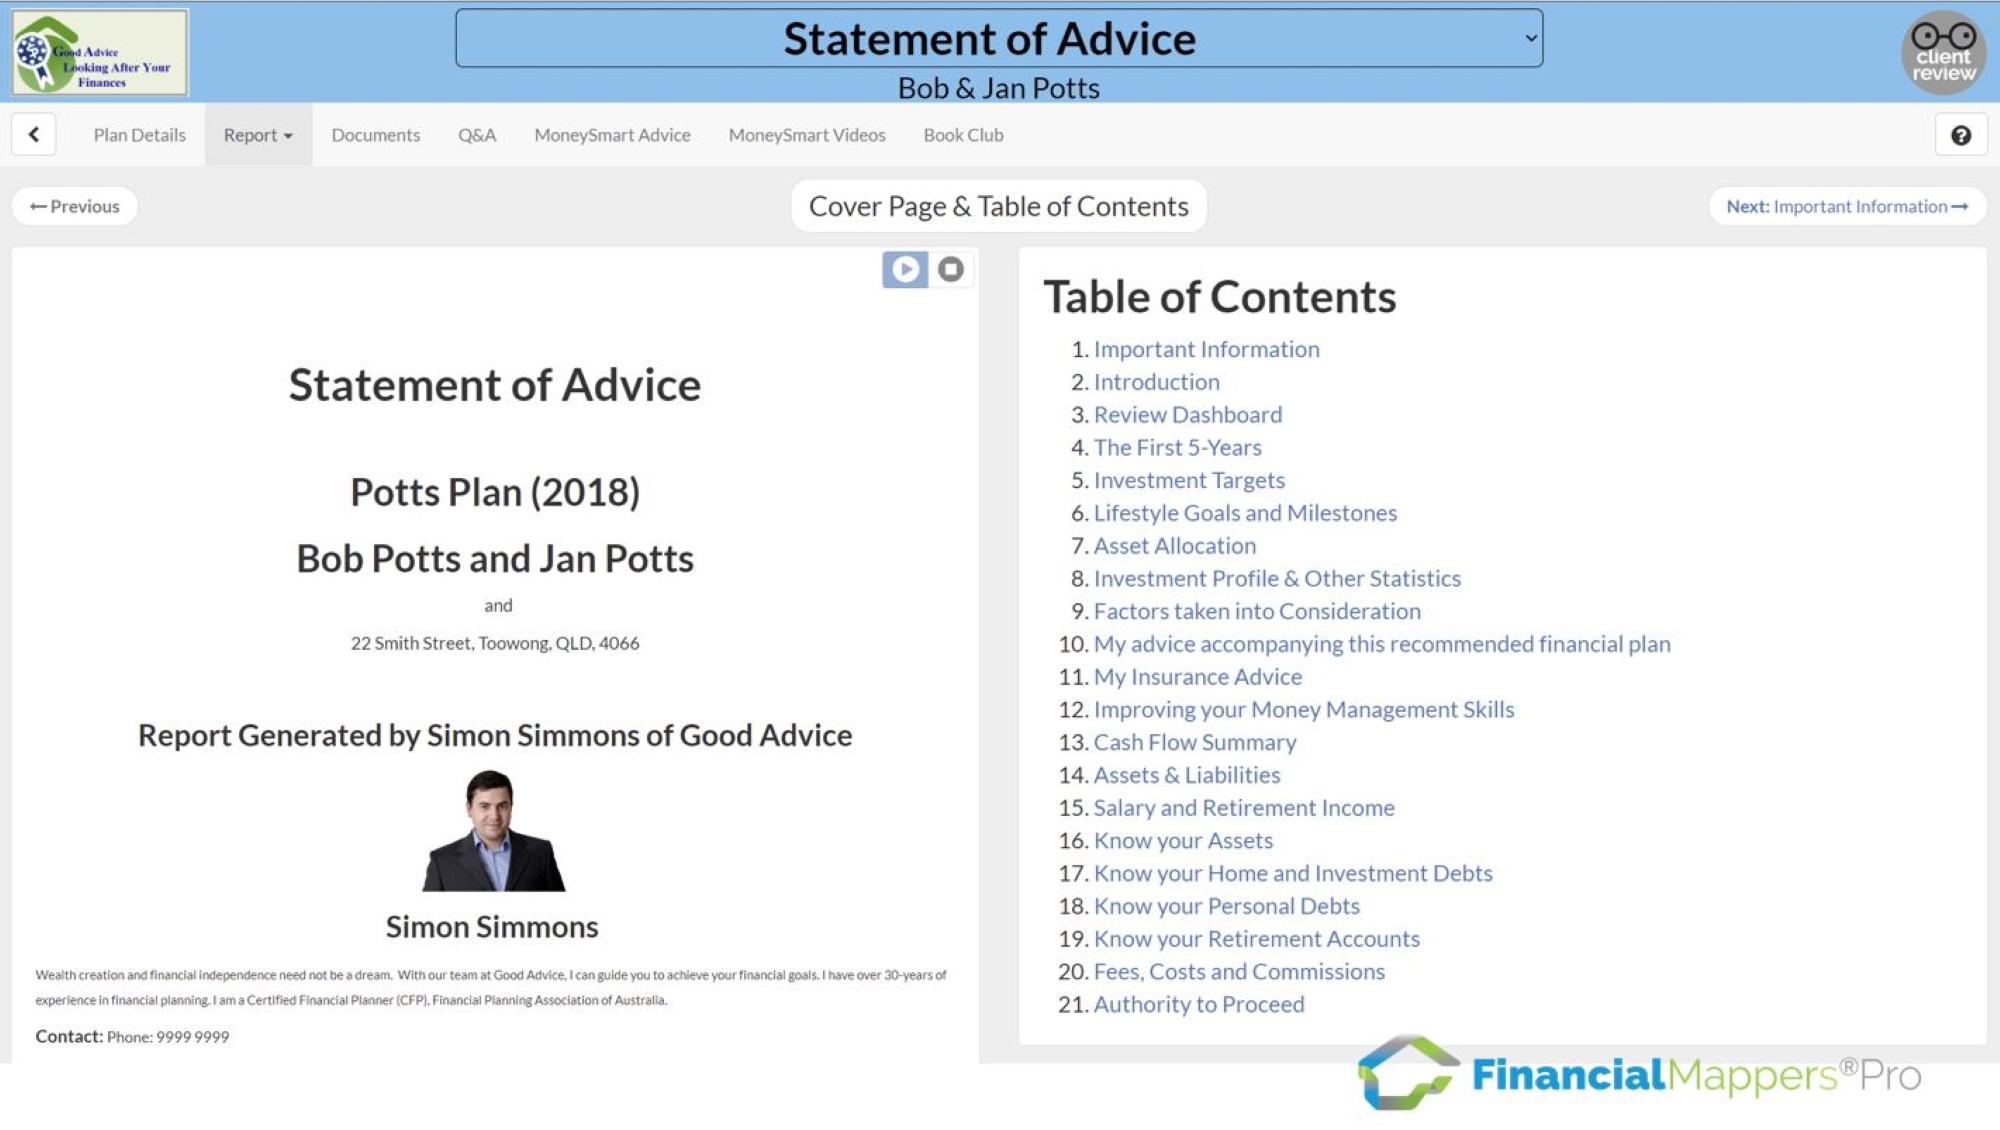 Statement of Advice report generated by a Financial Adviser using Financial Mappers Pro software moving through the contents one section at a time.